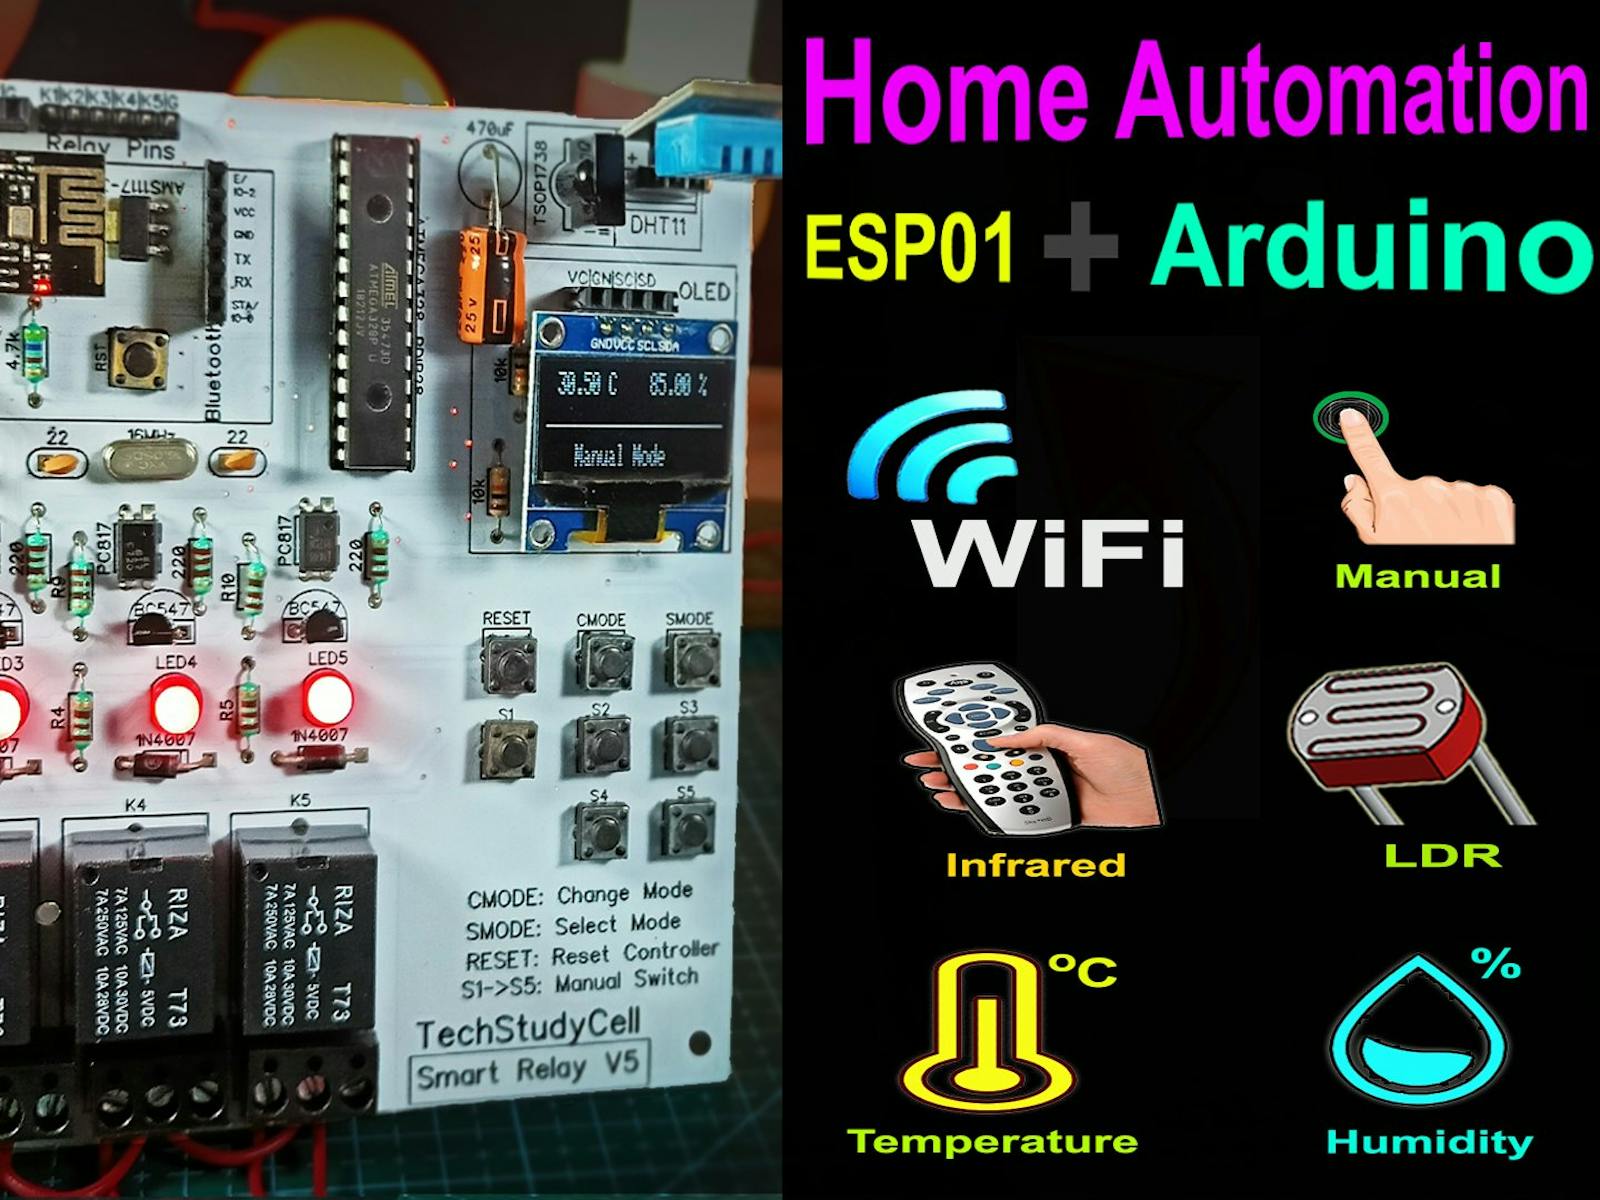 Best WiFi Smart Switch 110V 220V Home Automation module For Smart